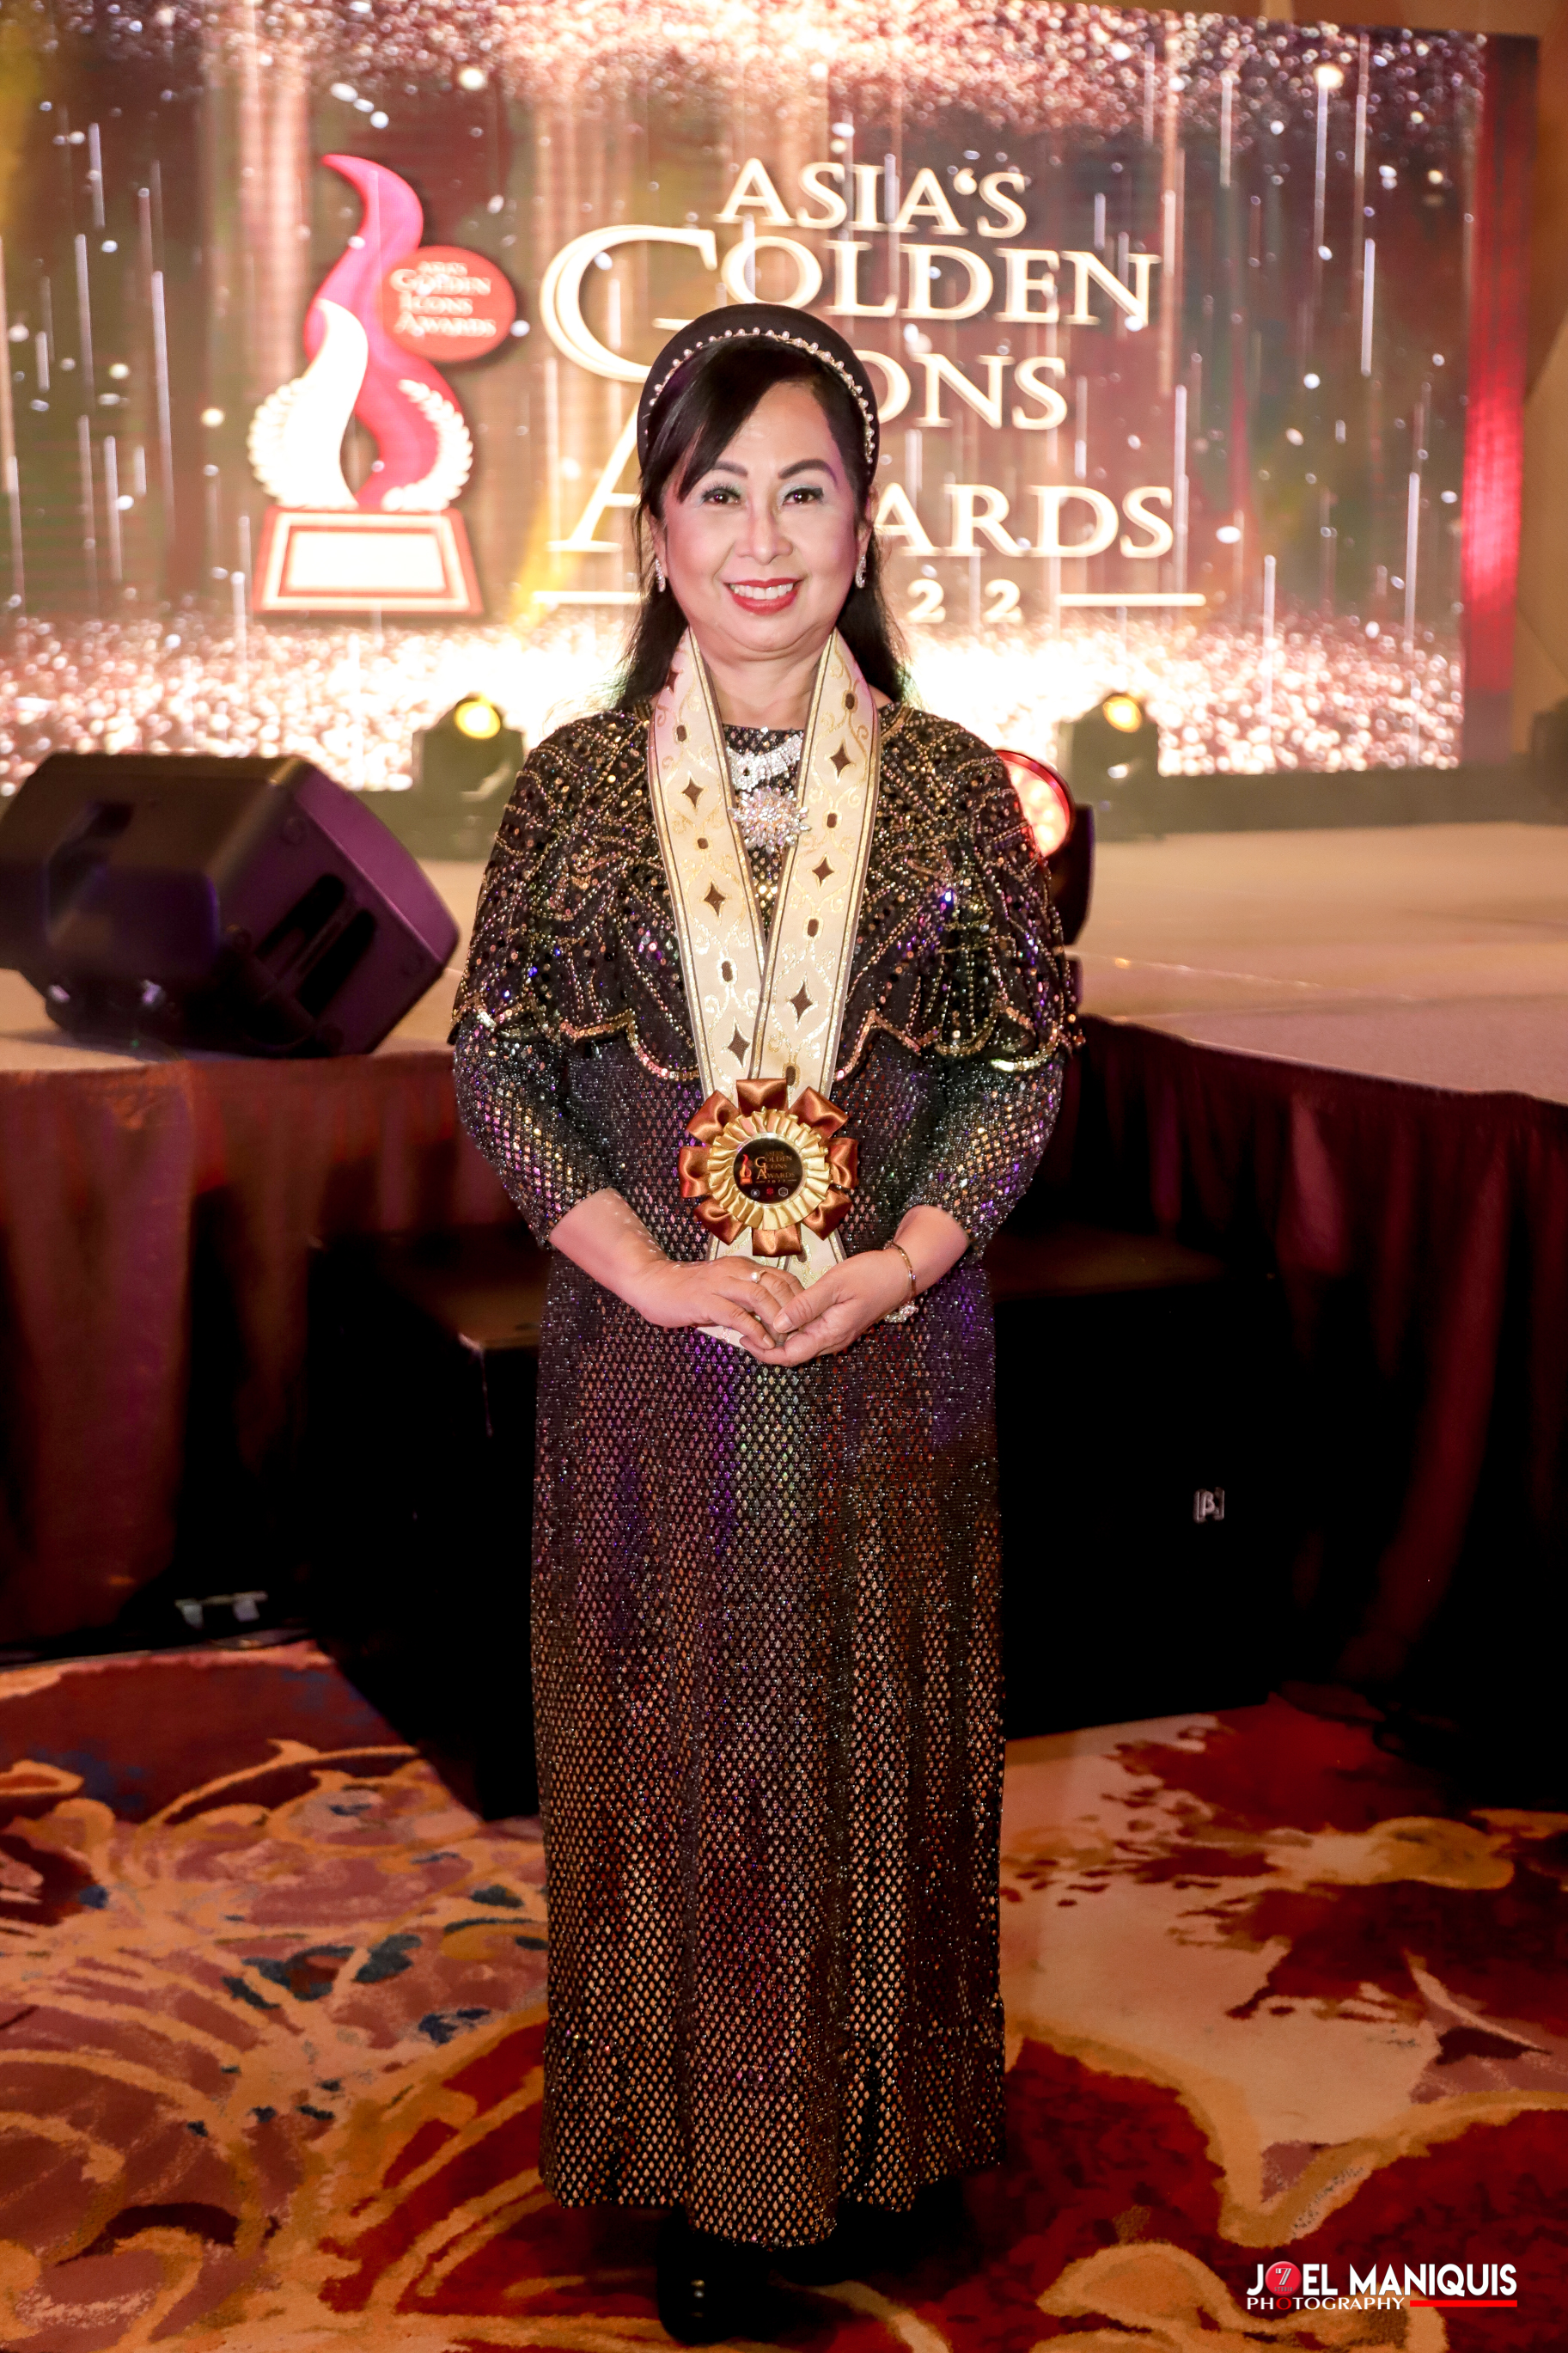 Asia's Golden Icons Awards 2022